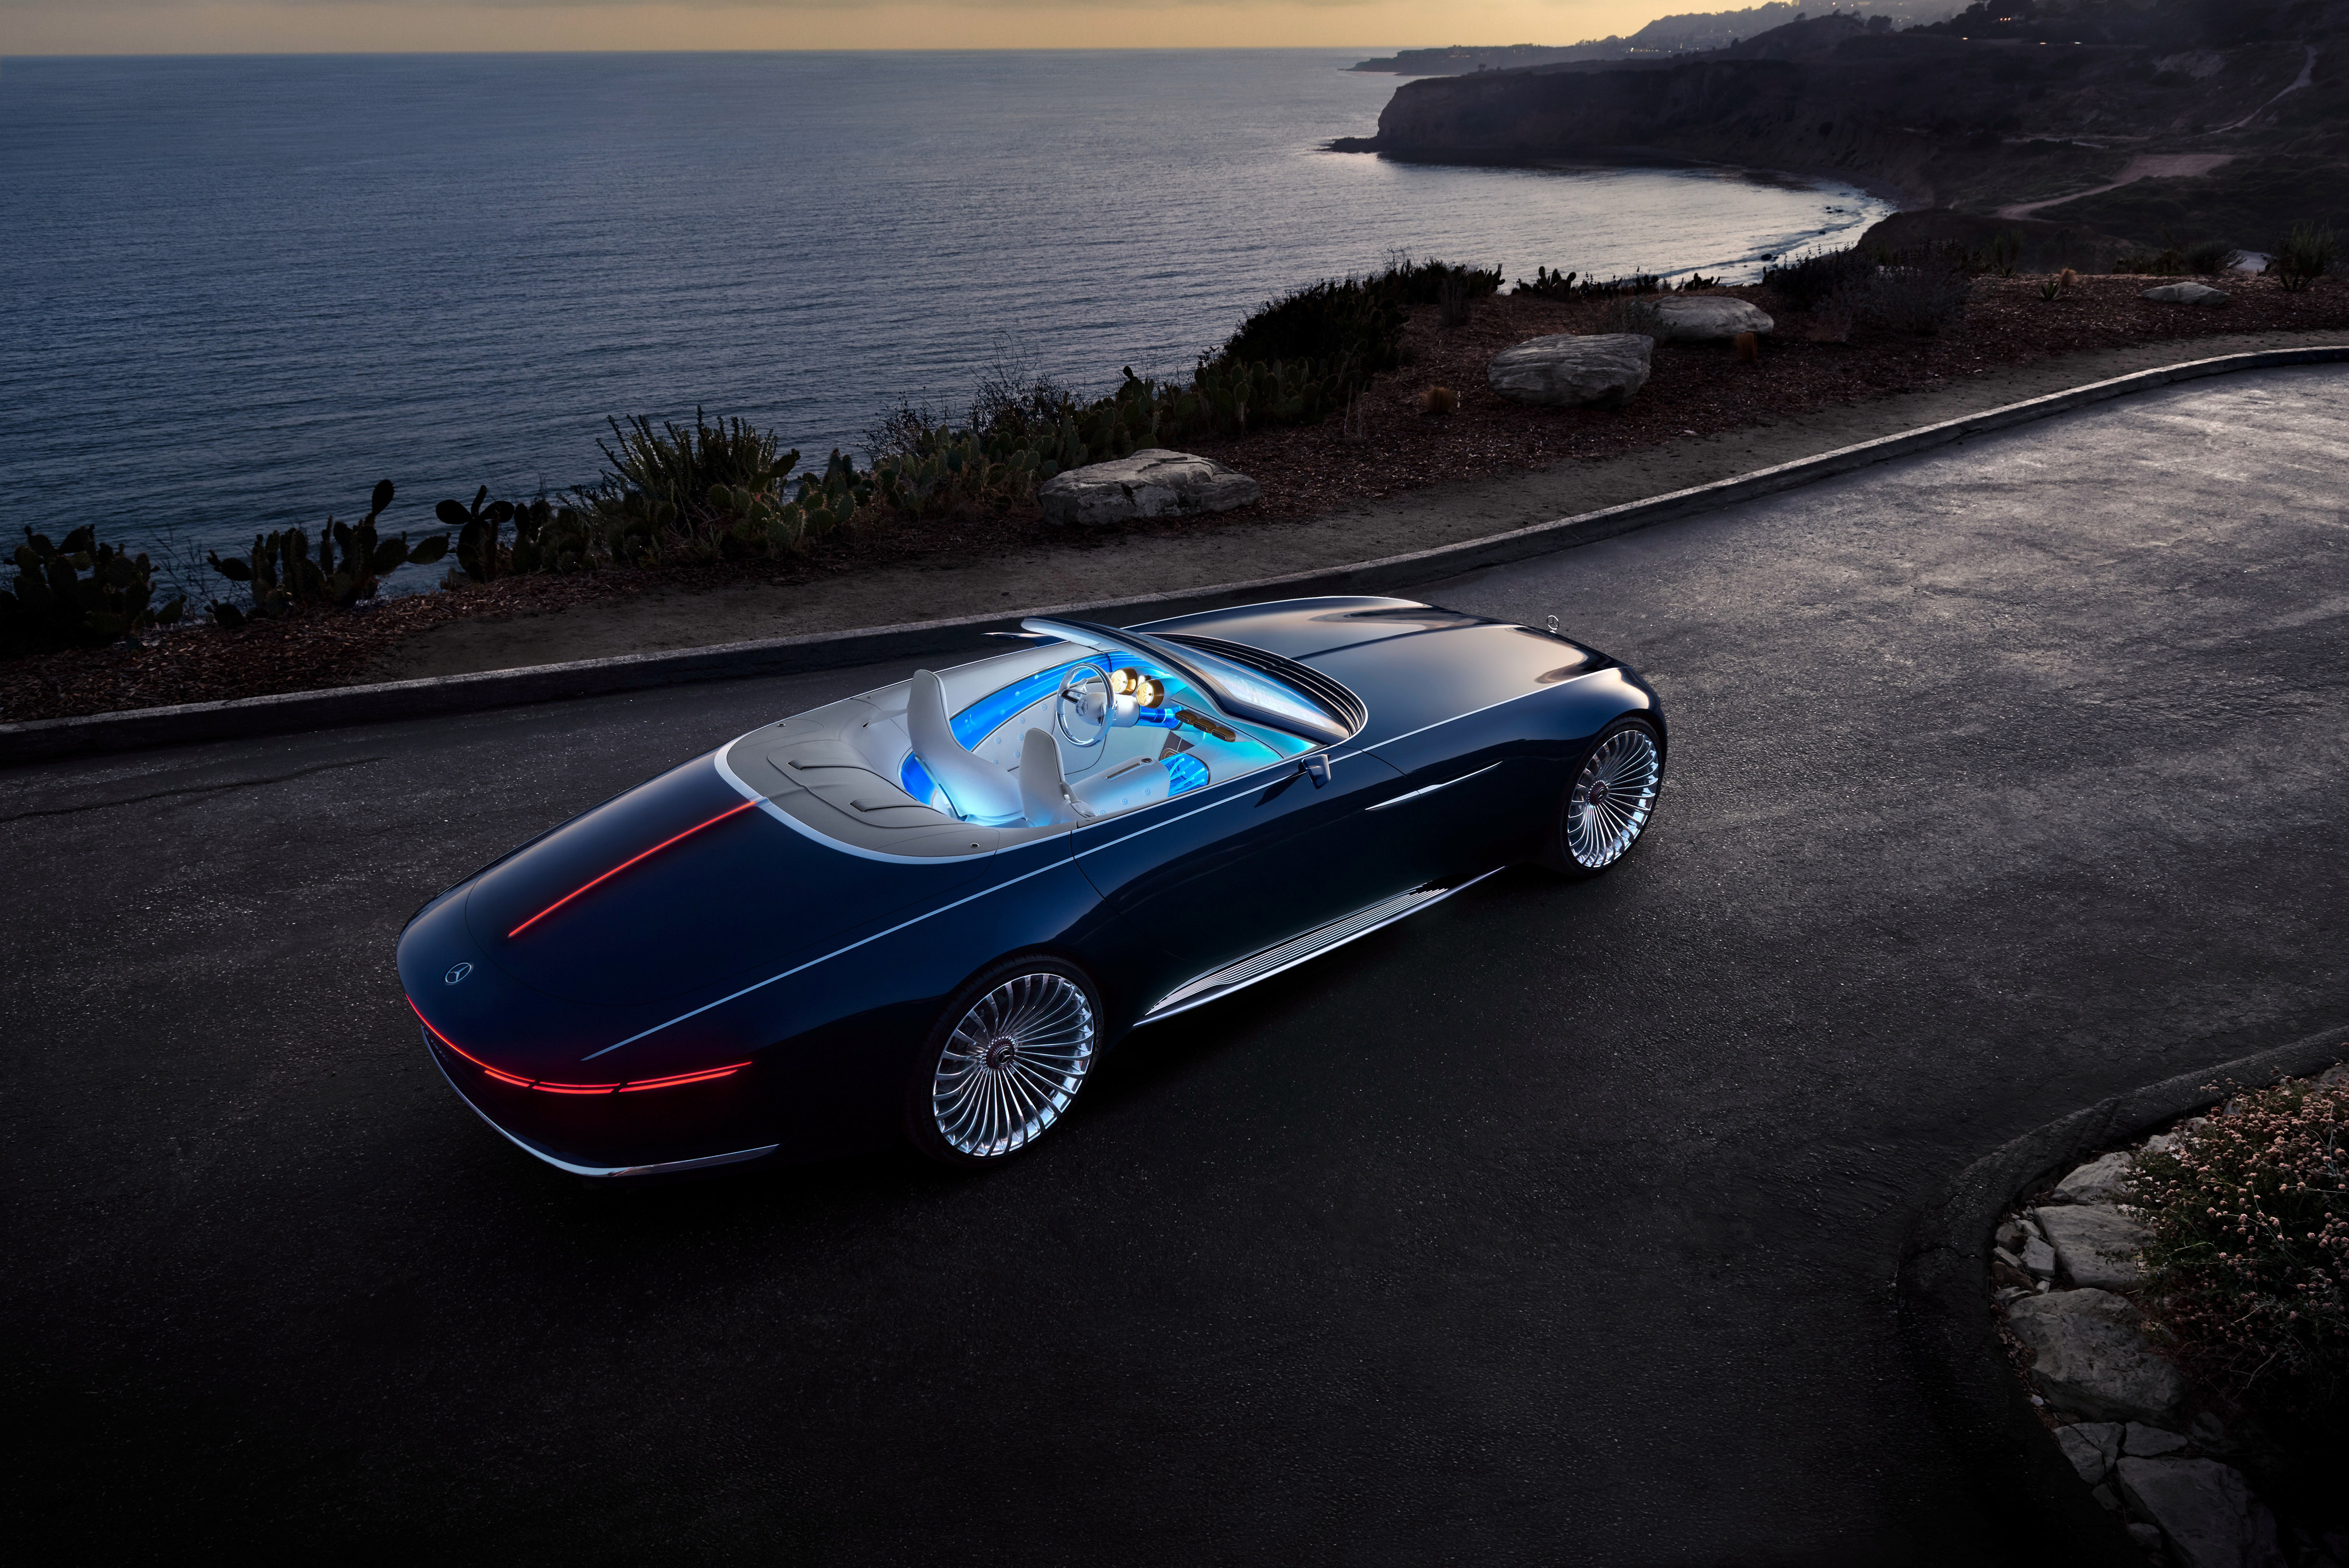 Mercedes-Maybach 6 Wallpapers